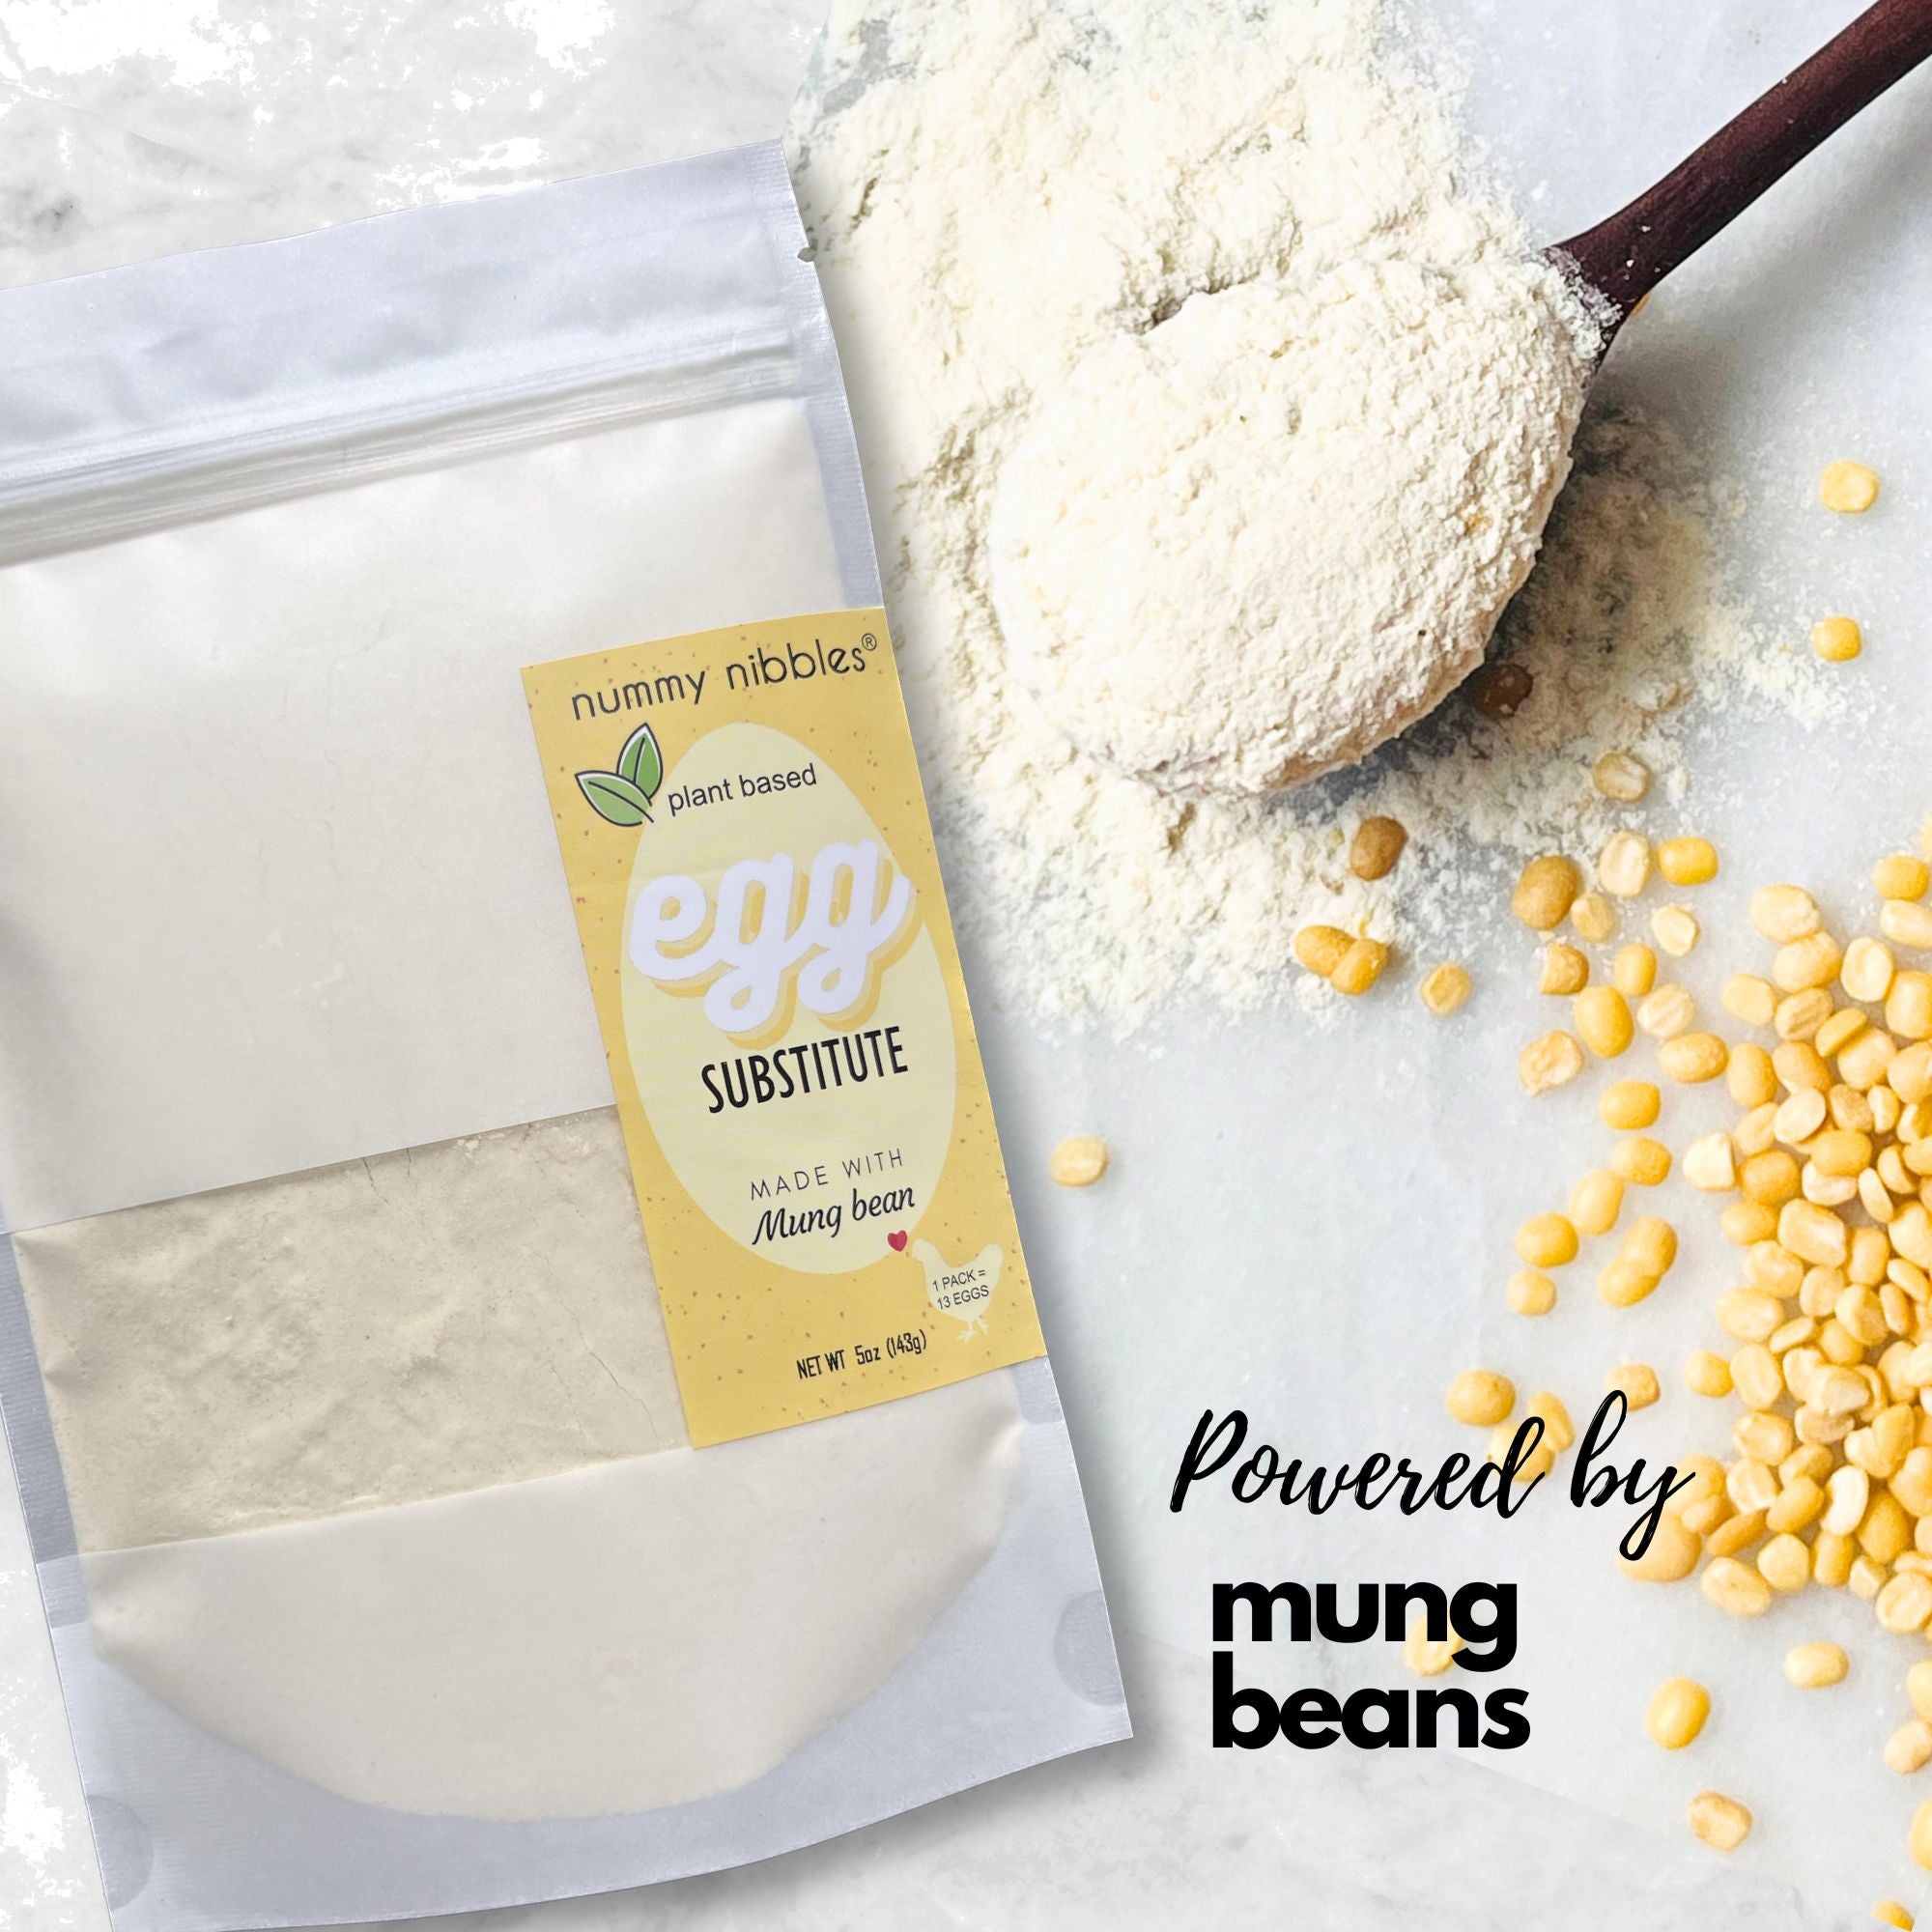 Pouch of Mung Bean Based Vegan Egg Substitute Powder with caption Powered by Mung Beans